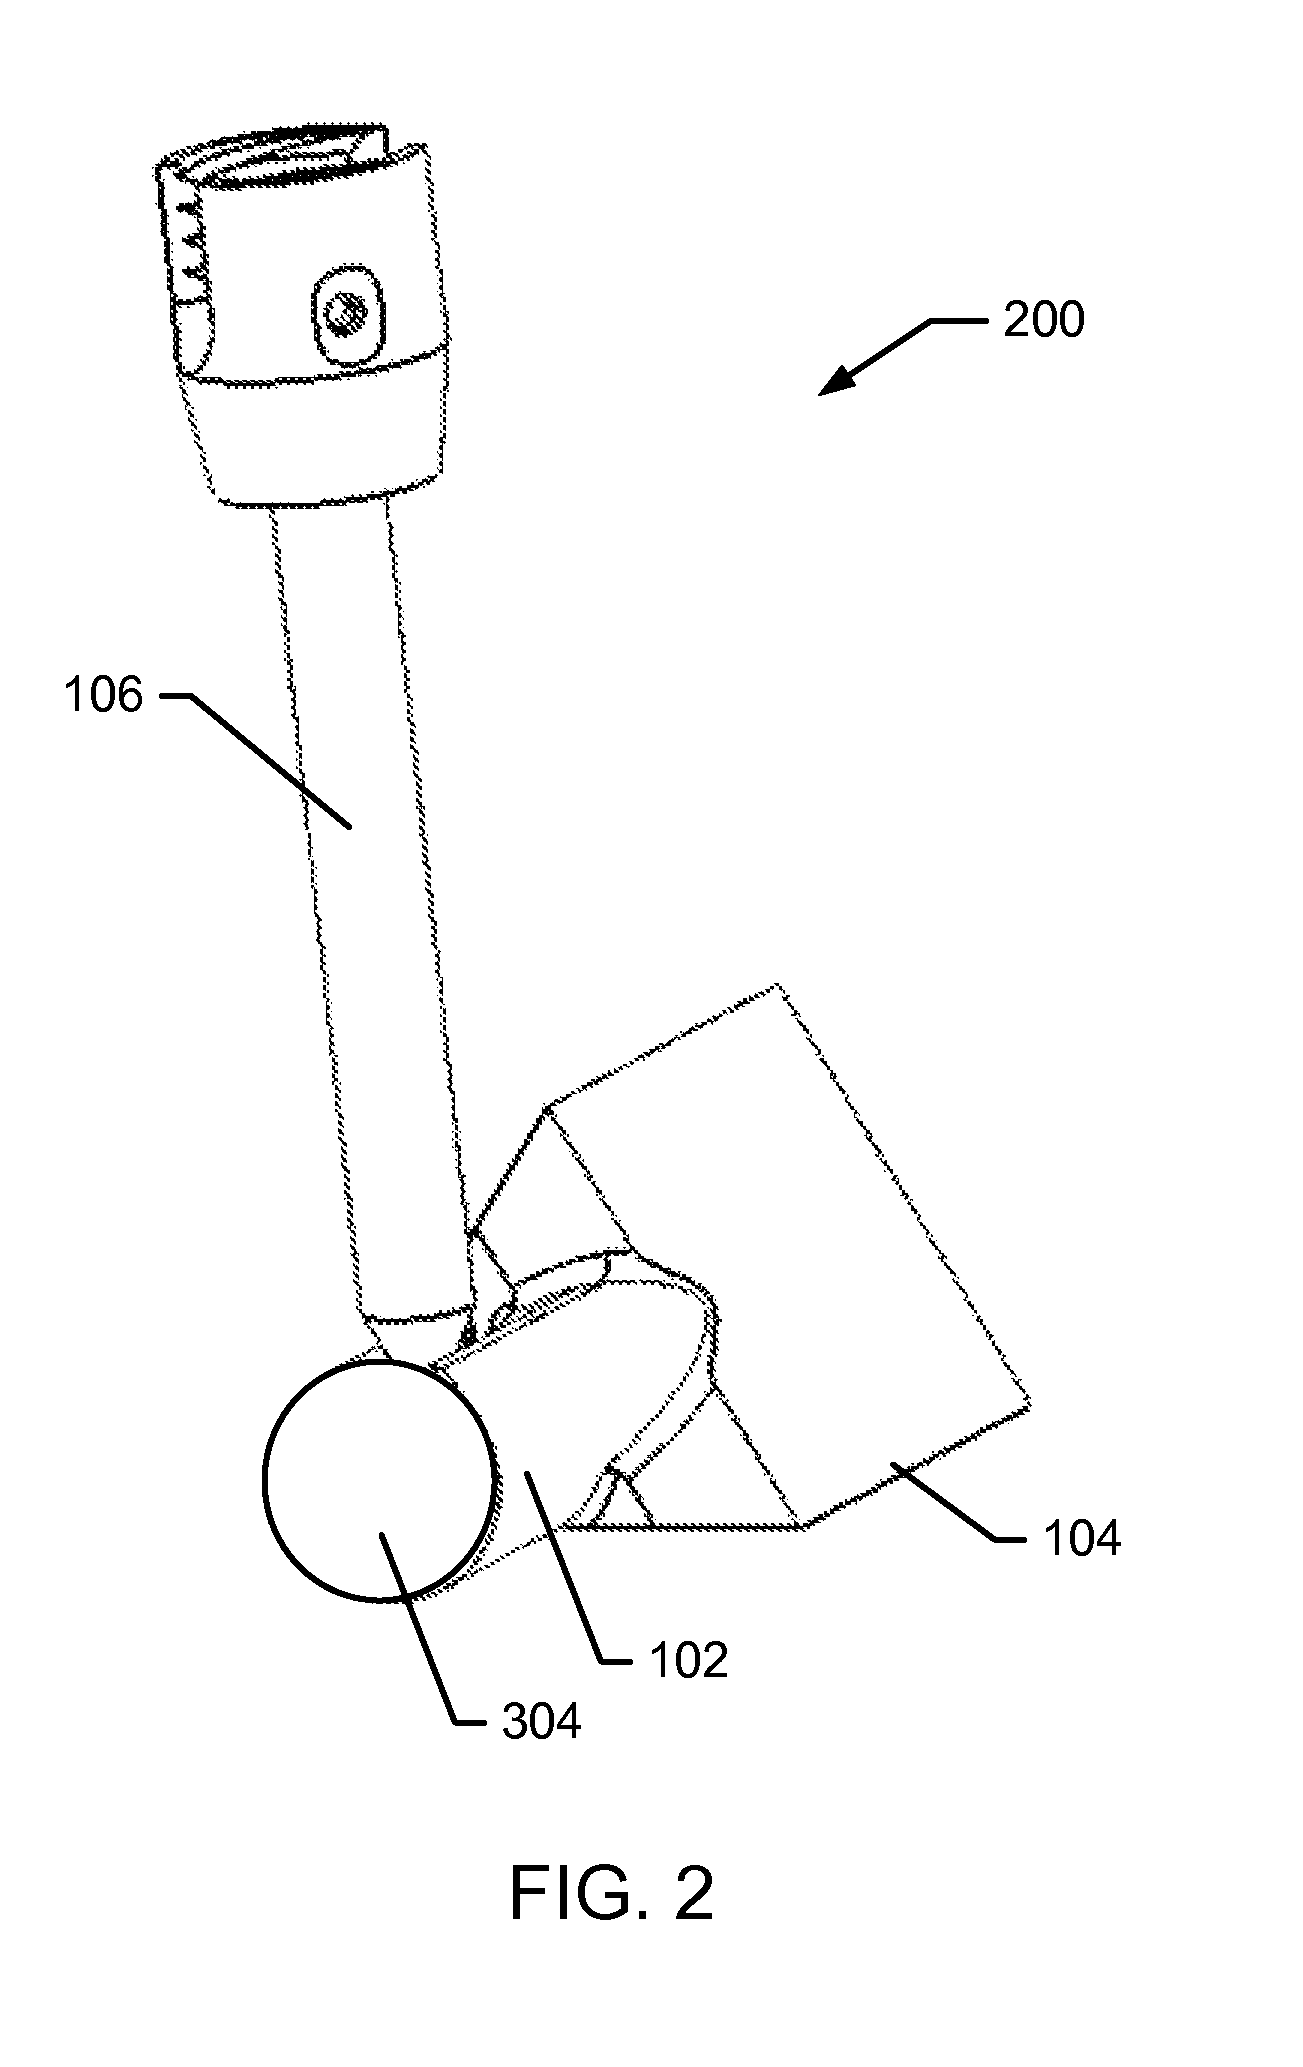 Orthopedic anchoring system and methods